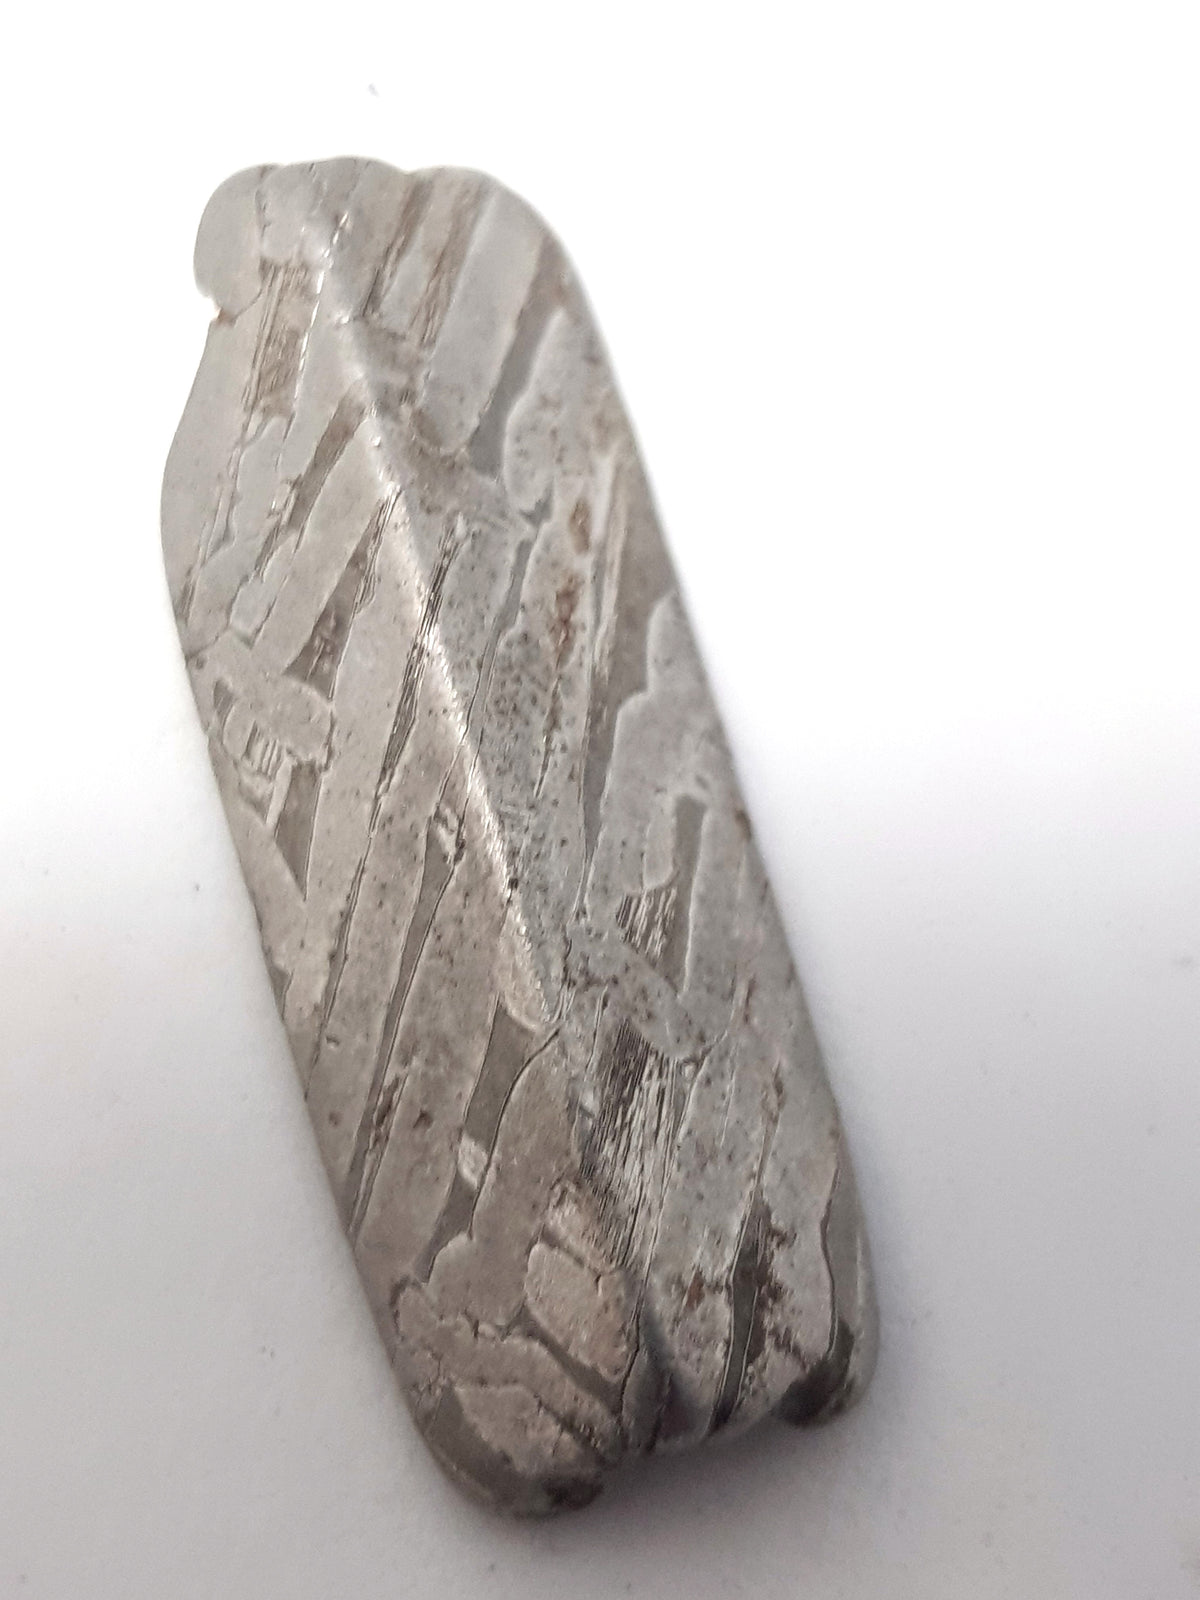 A long triangular cut section o seymchan (an iron meteorite). The widmanstatten pattern is very obvious. The sample is rough at each end.